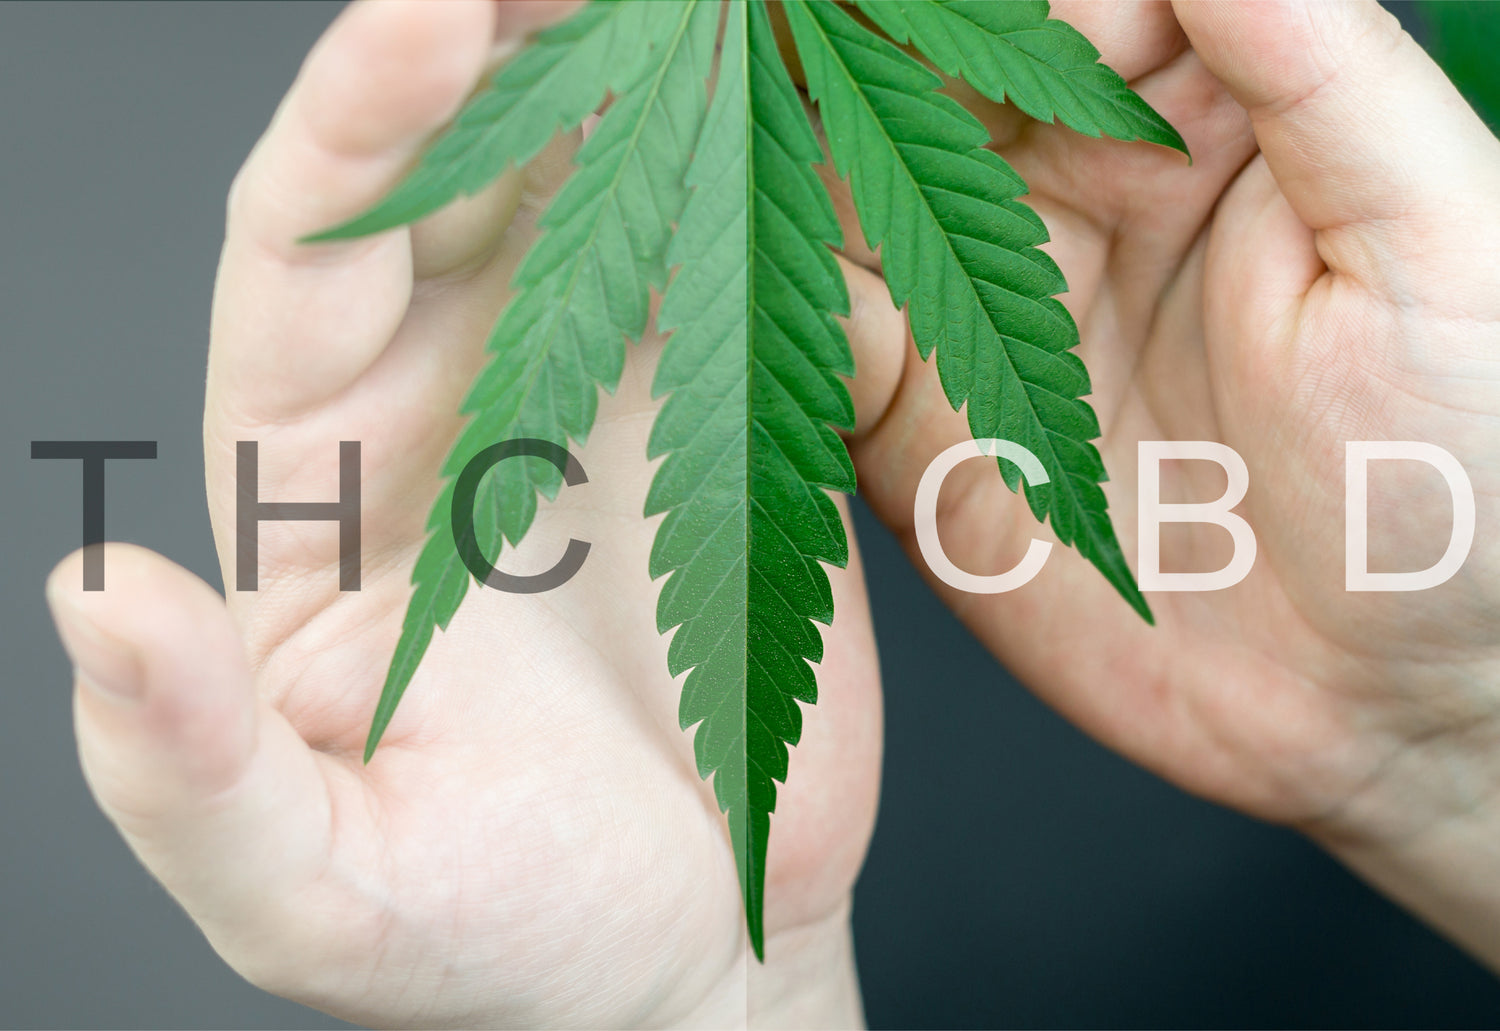 <strong>CBD vs THC: Key Differences Between The Two Cannabinoids</strong>